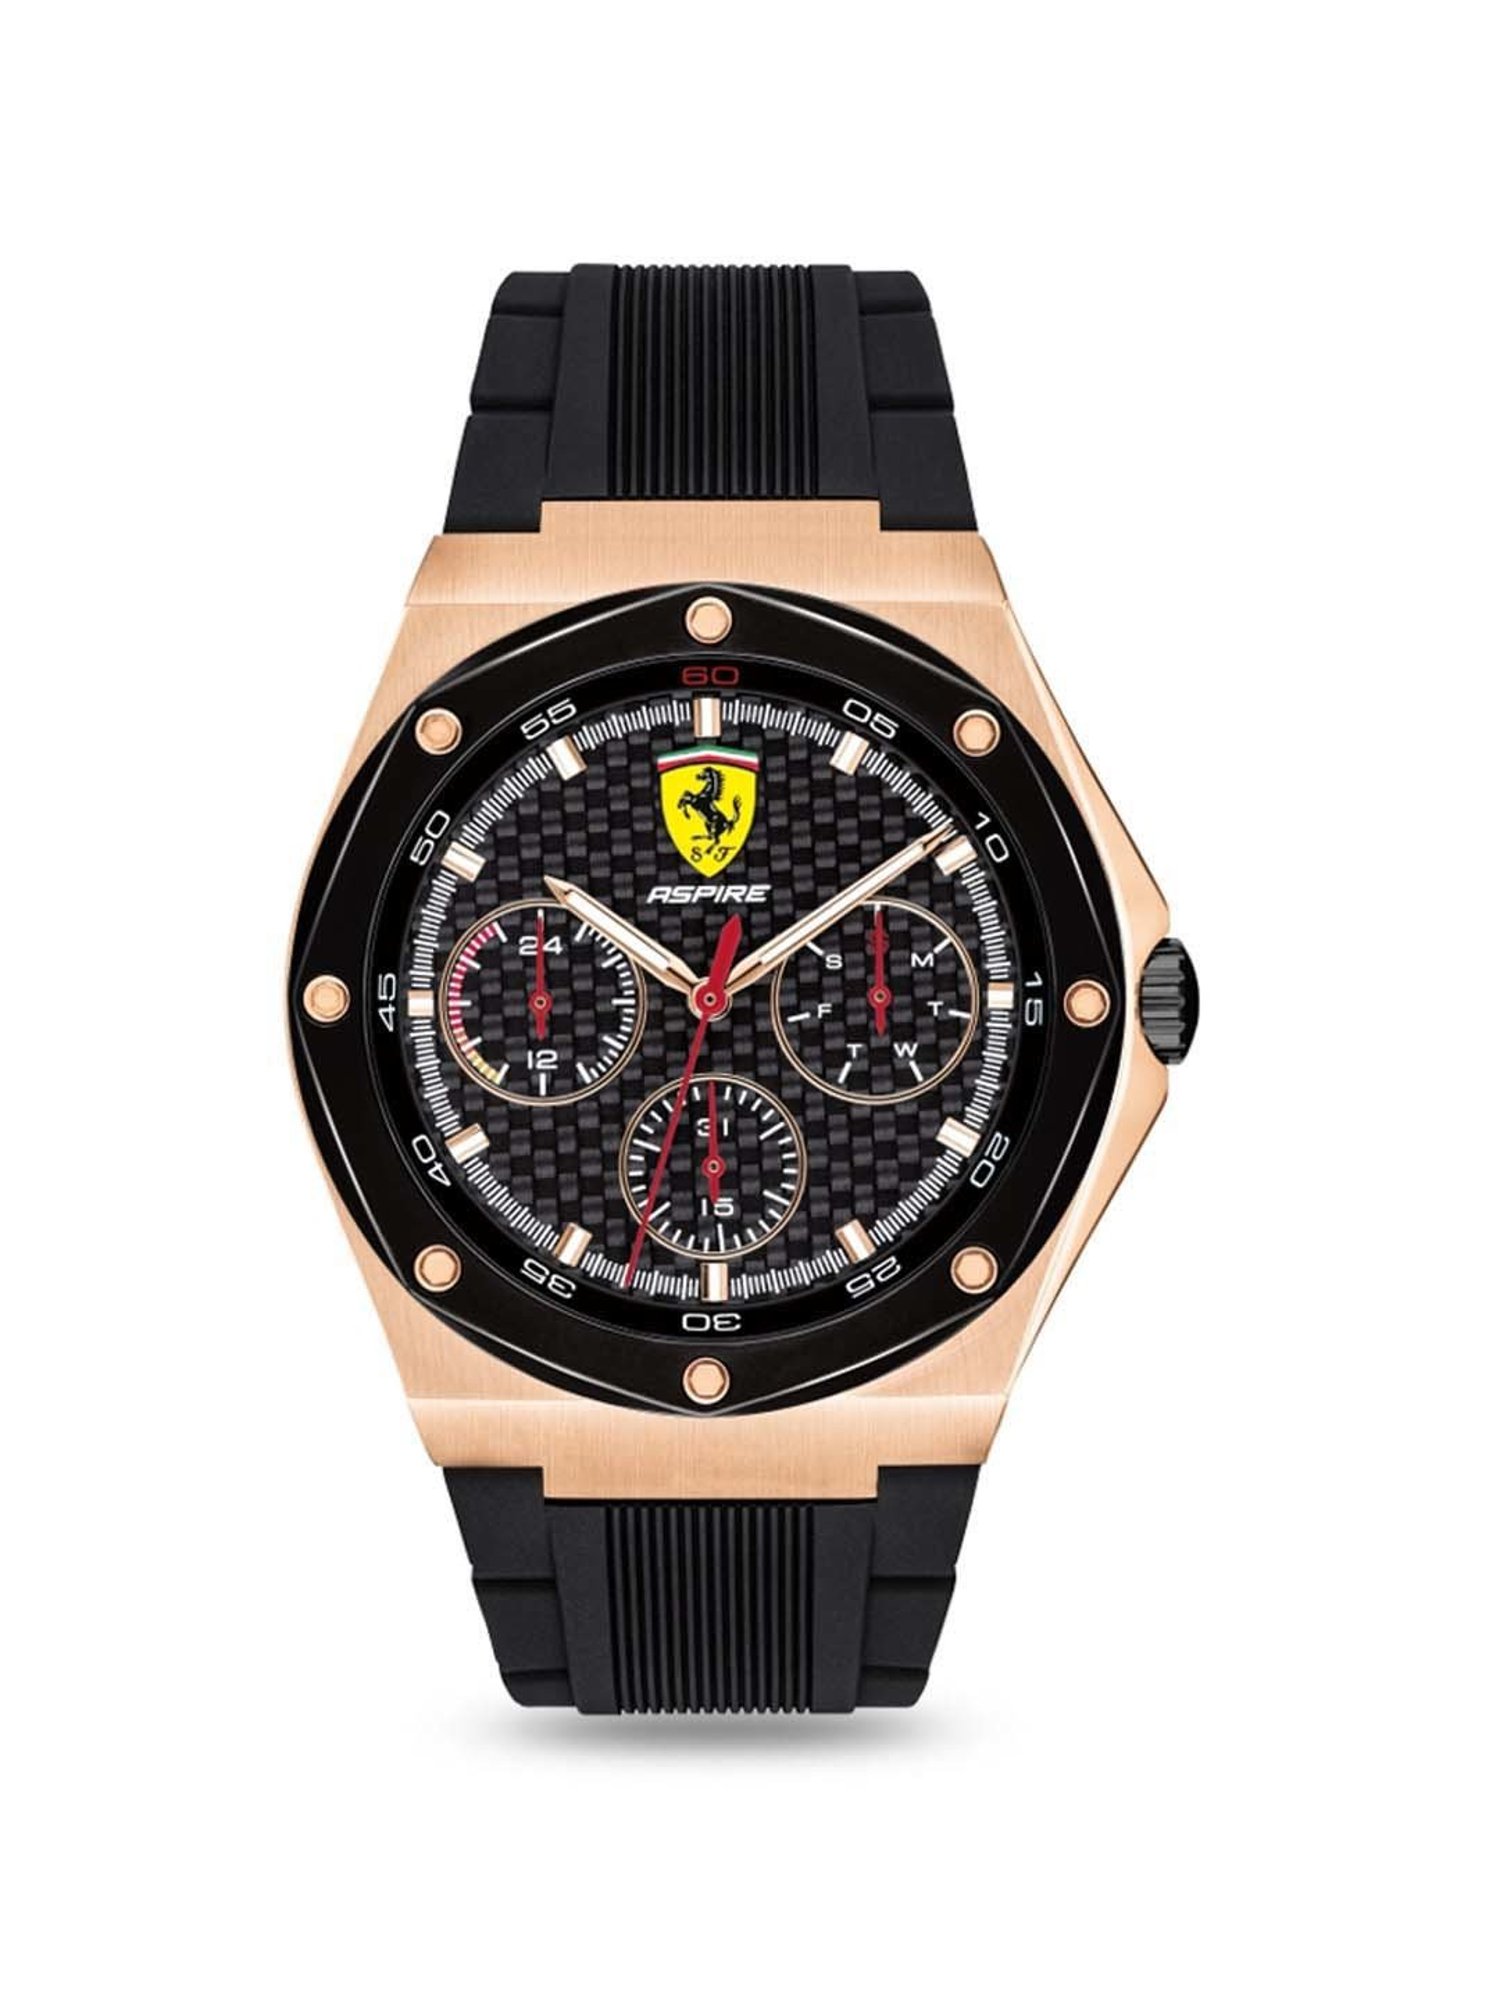 Richard Mille Ferrari Watch - Who's On First? - The Truth About Watches